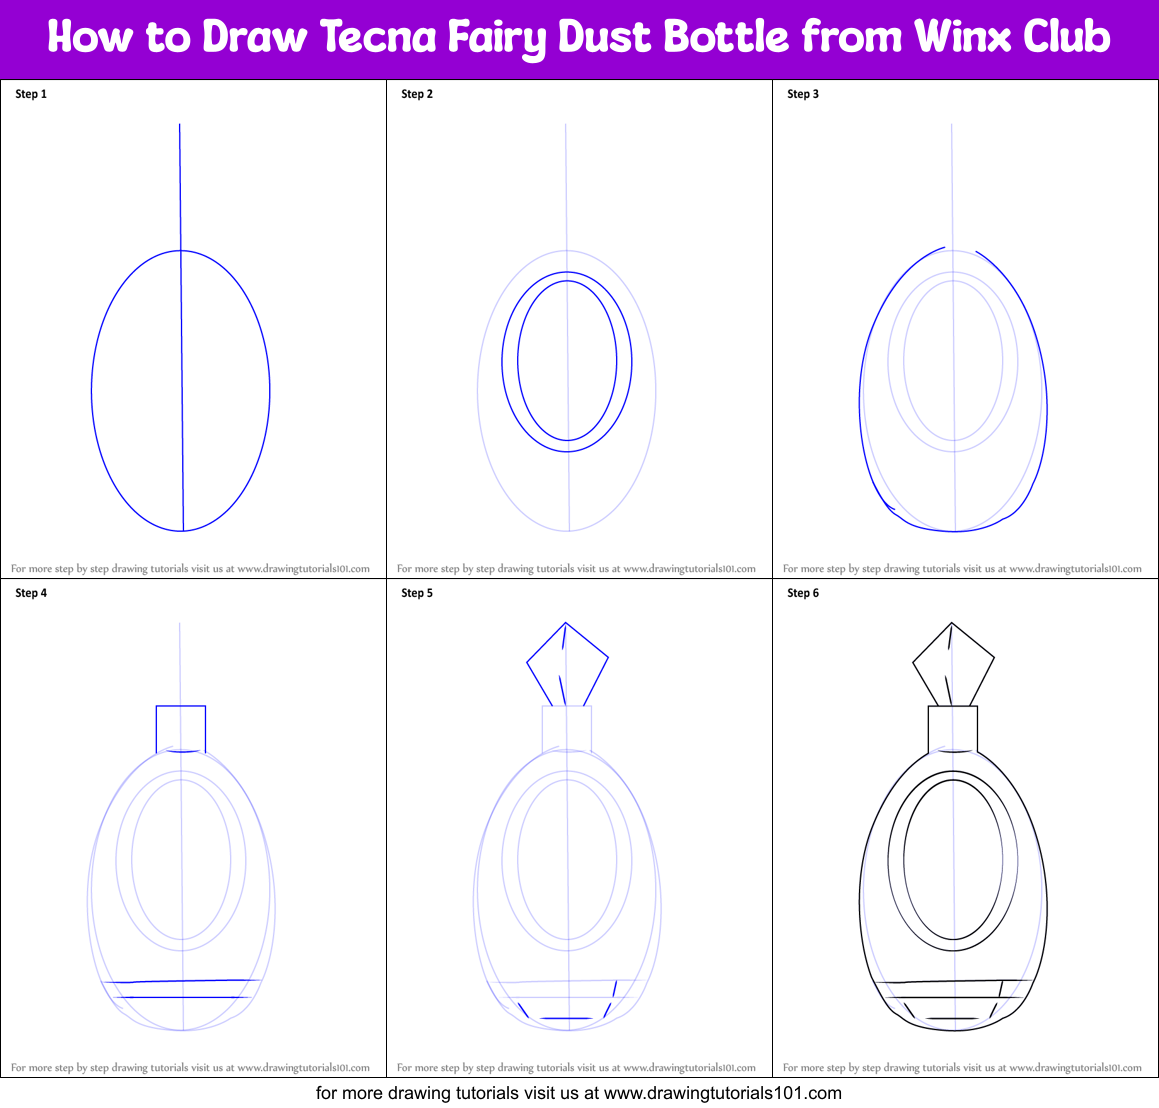 How To Draw Tecna Fairy Dust Bottle From Winx Club Printable Step